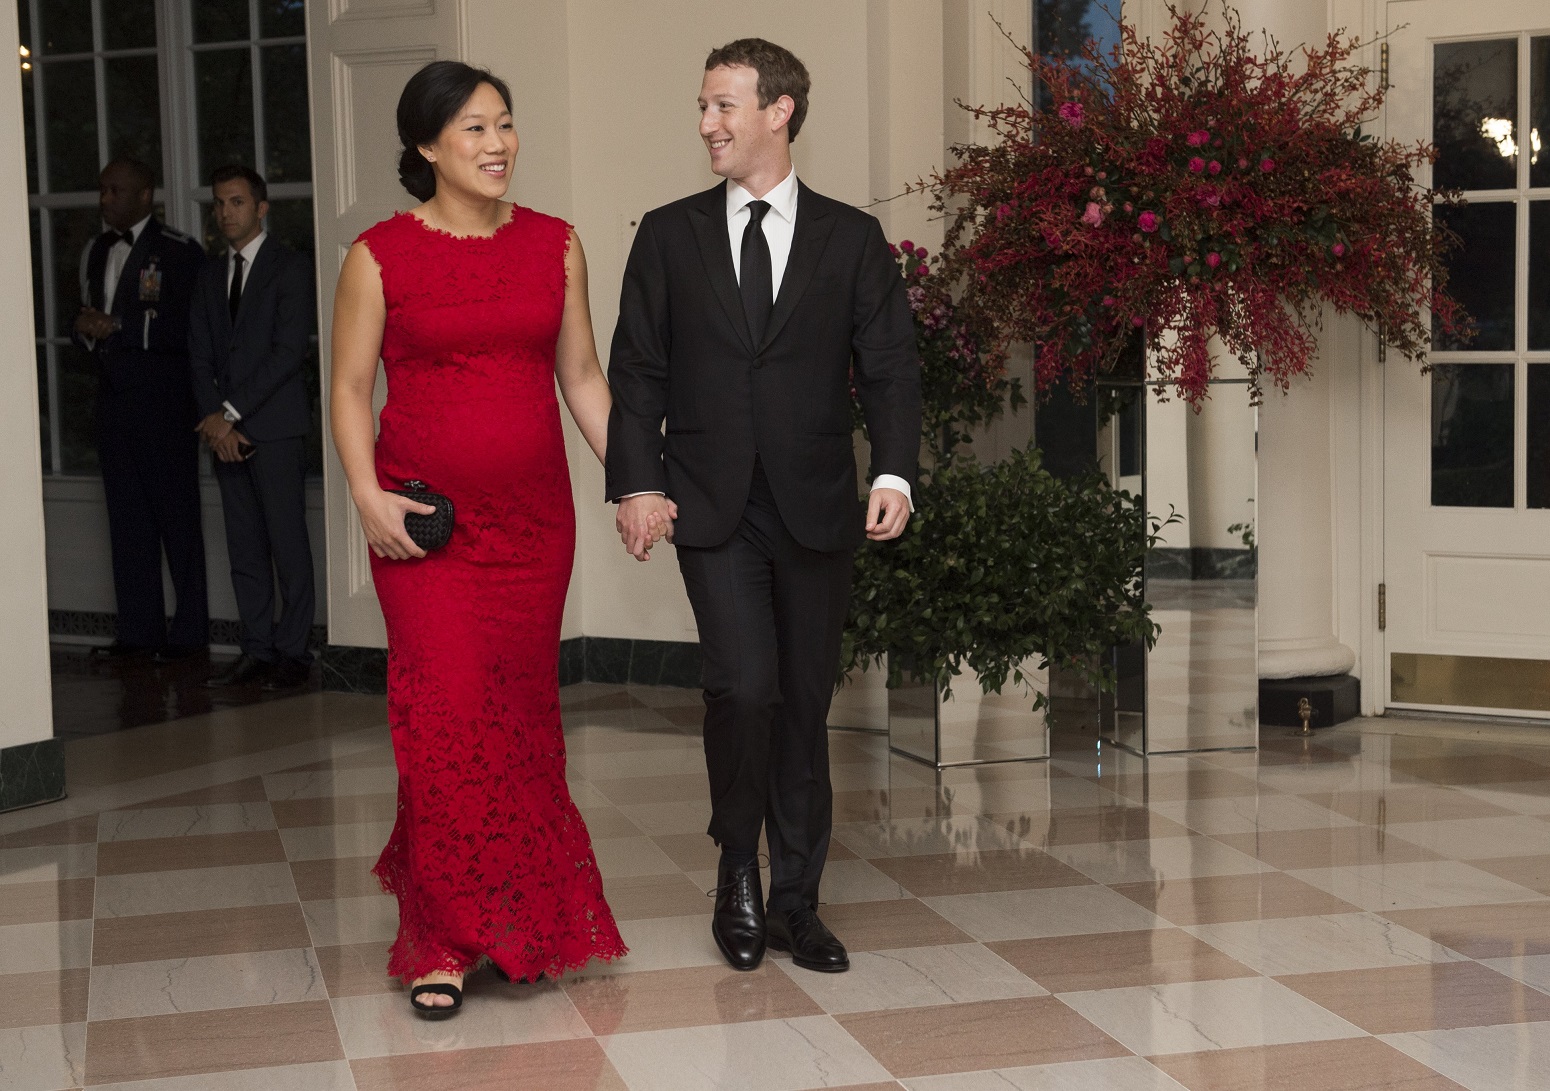 Mark Zuckerberg, Chairman and CEO of Facebook and his wife, Priscilla Chan, arrive for a State Dinner hosted by US President Barack Obama for Chinese President Xi Jinping at the White House in Washington, DC, September 25, 2015. AFP PHOTO / MOLLY RILEY